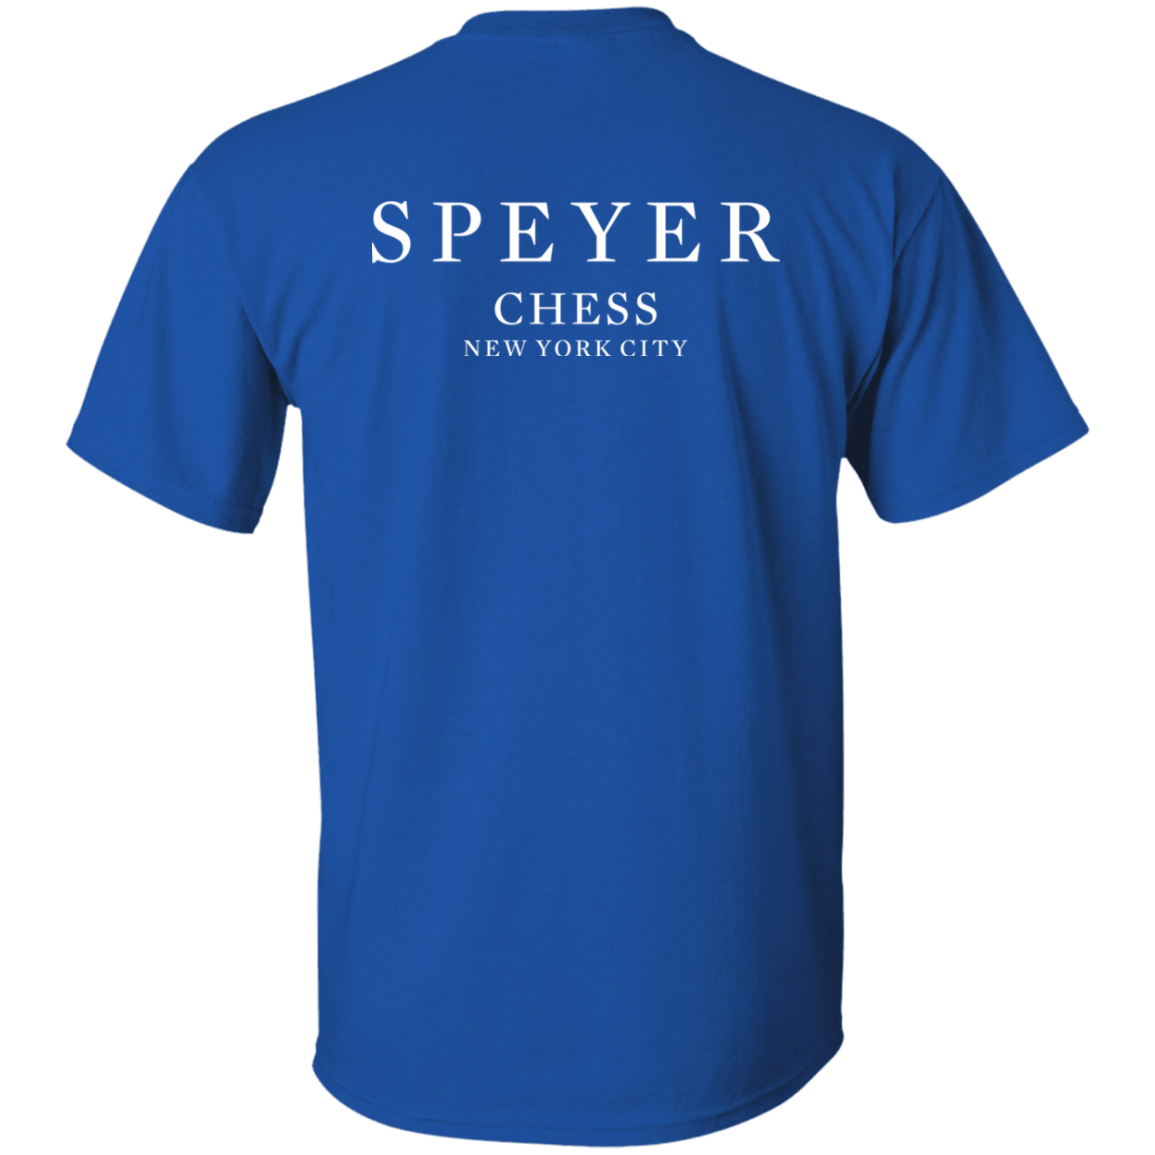 Speyer Chess T-Shirt, Youth Sizes